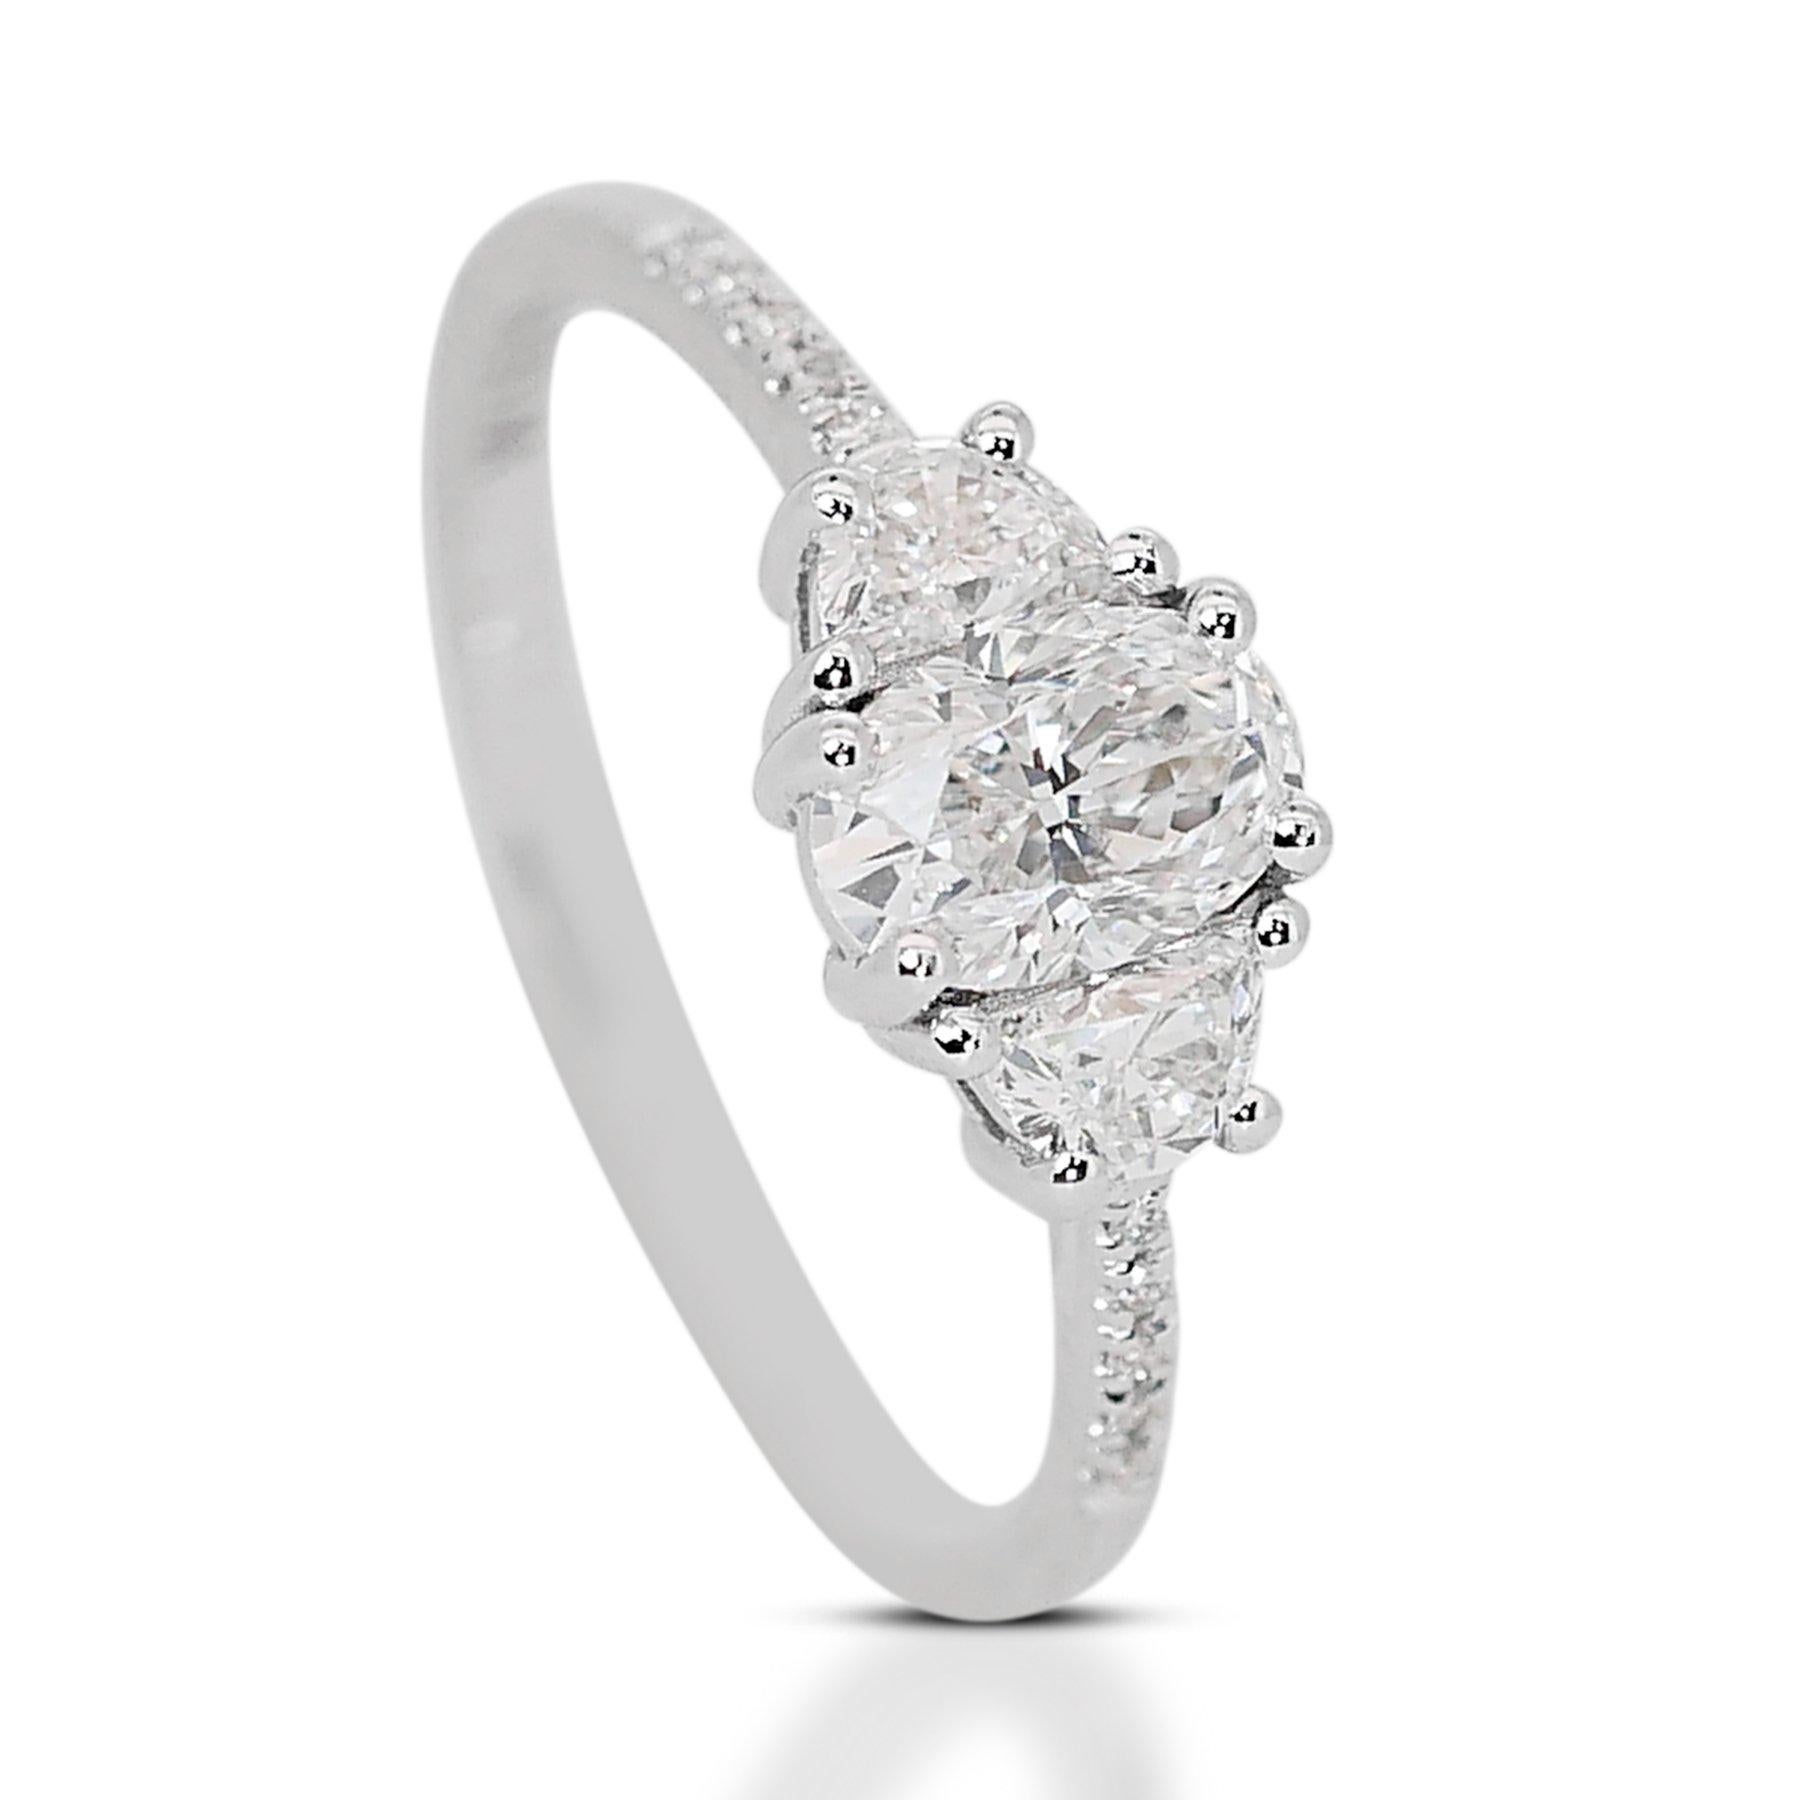 Glamorous 18K White Gold Natural Diamond Halo Ring w/1.34ct - GIA Certified

Crafted with utmost precision, this timeless piece features a glamorous 1.00 carat Brilliant-cut diamond as its focal point. Enhancing the allure of this stunning ring are